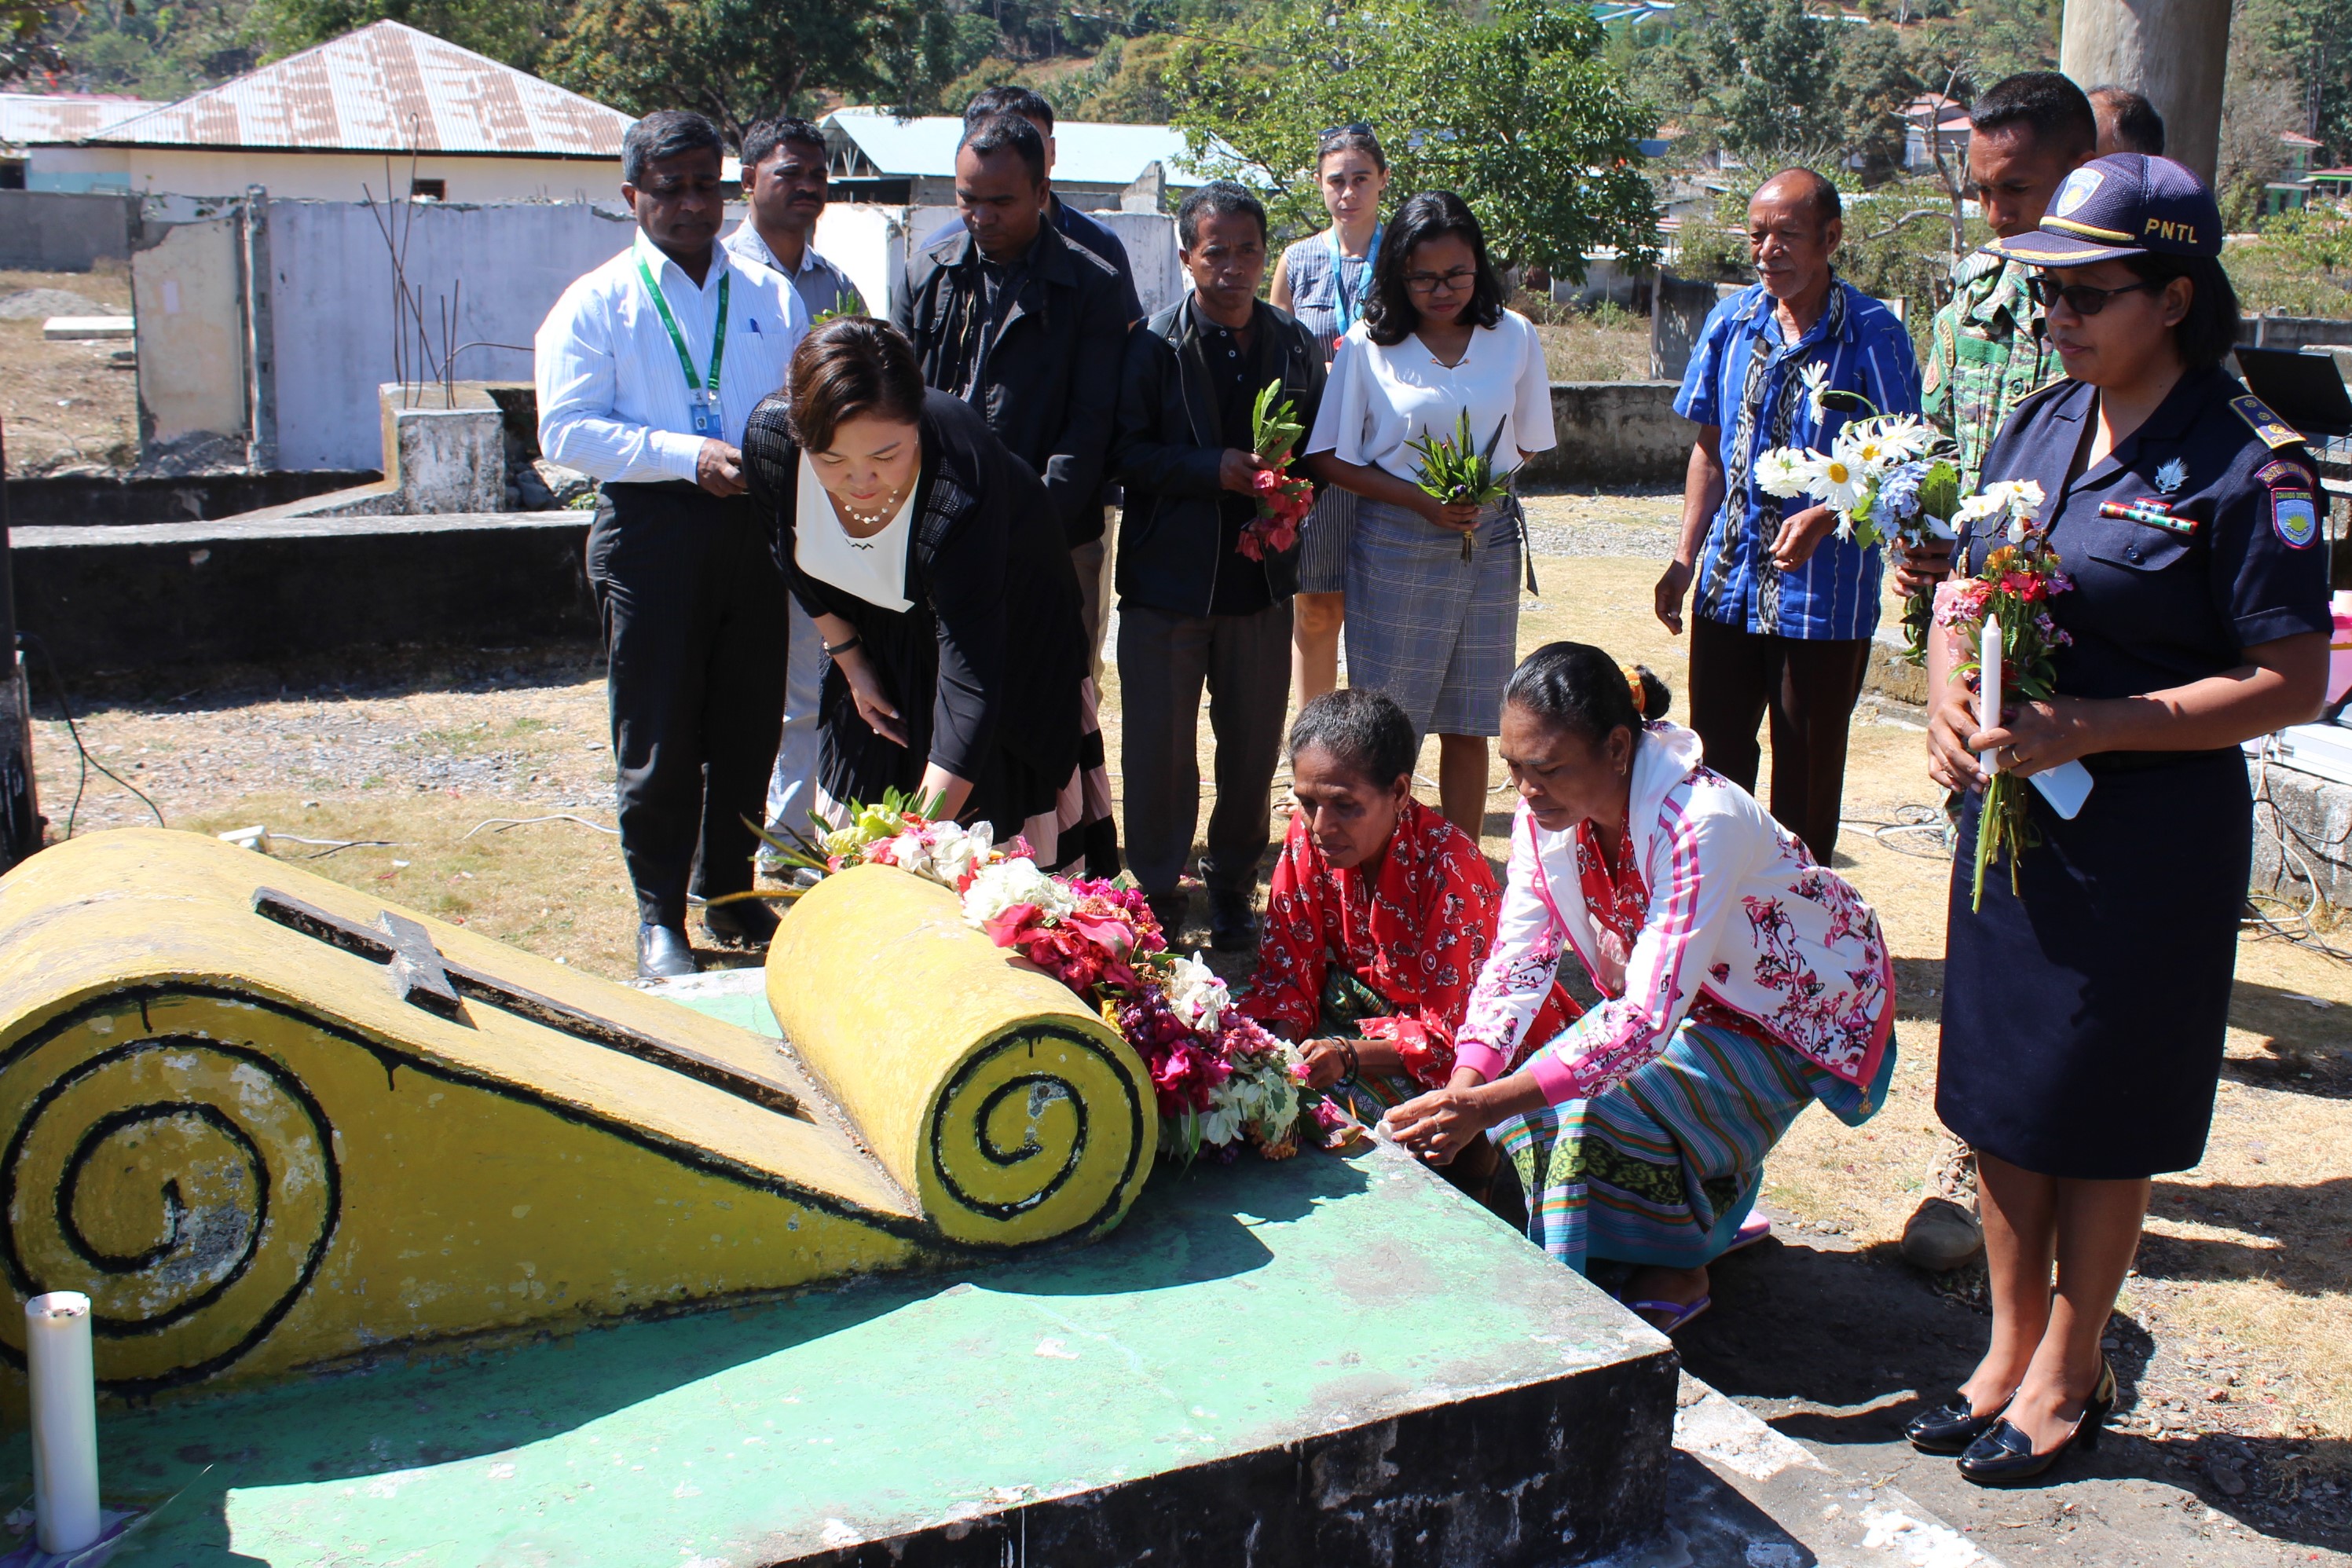 UN commemorates those who died while in service in Timor-Leste at Gleno